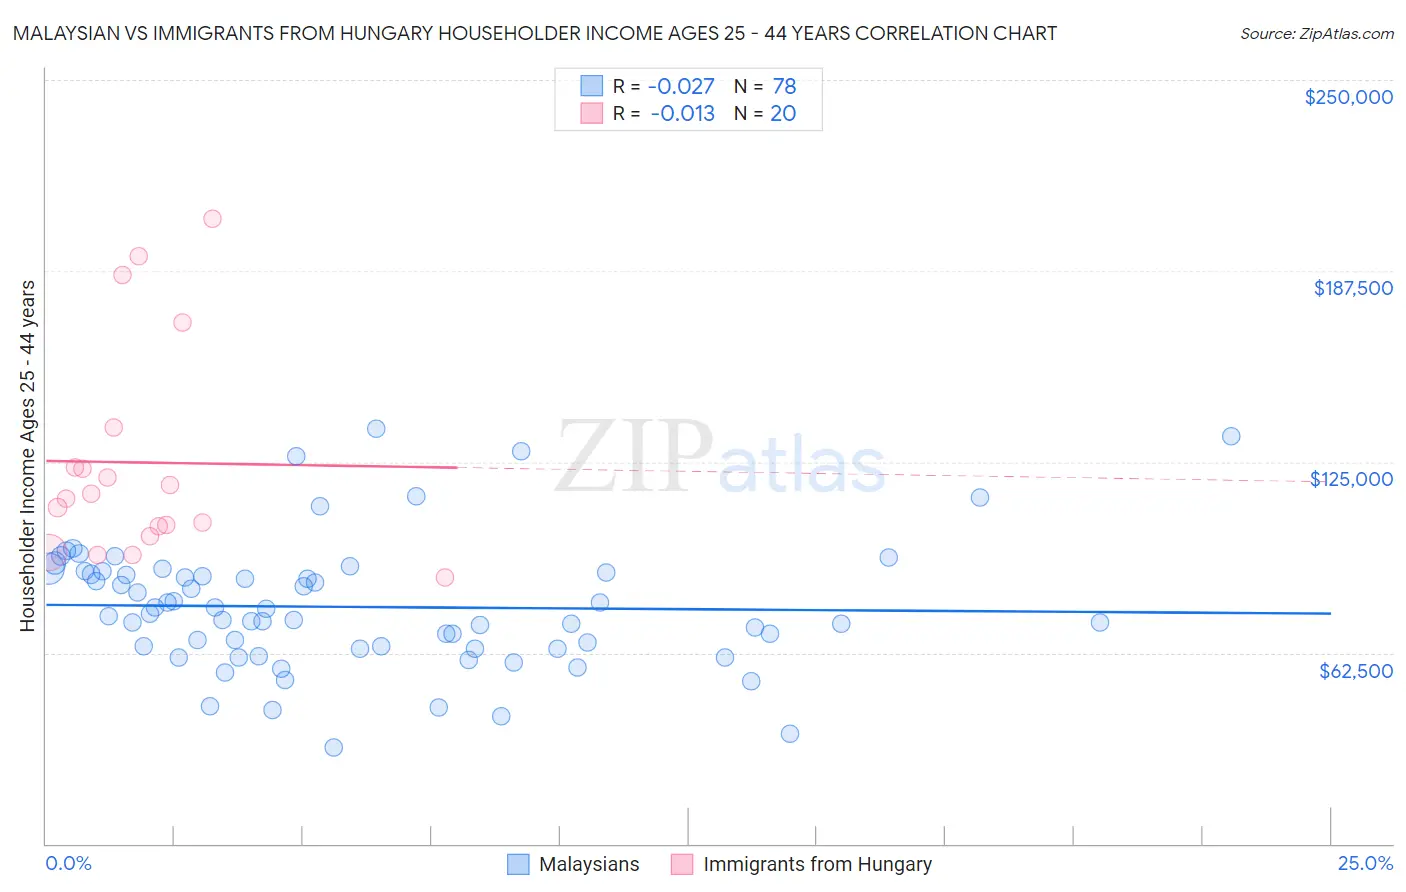 Malaysian vs Immigrants from Hungary Householder Income Ages 25 - 44 years